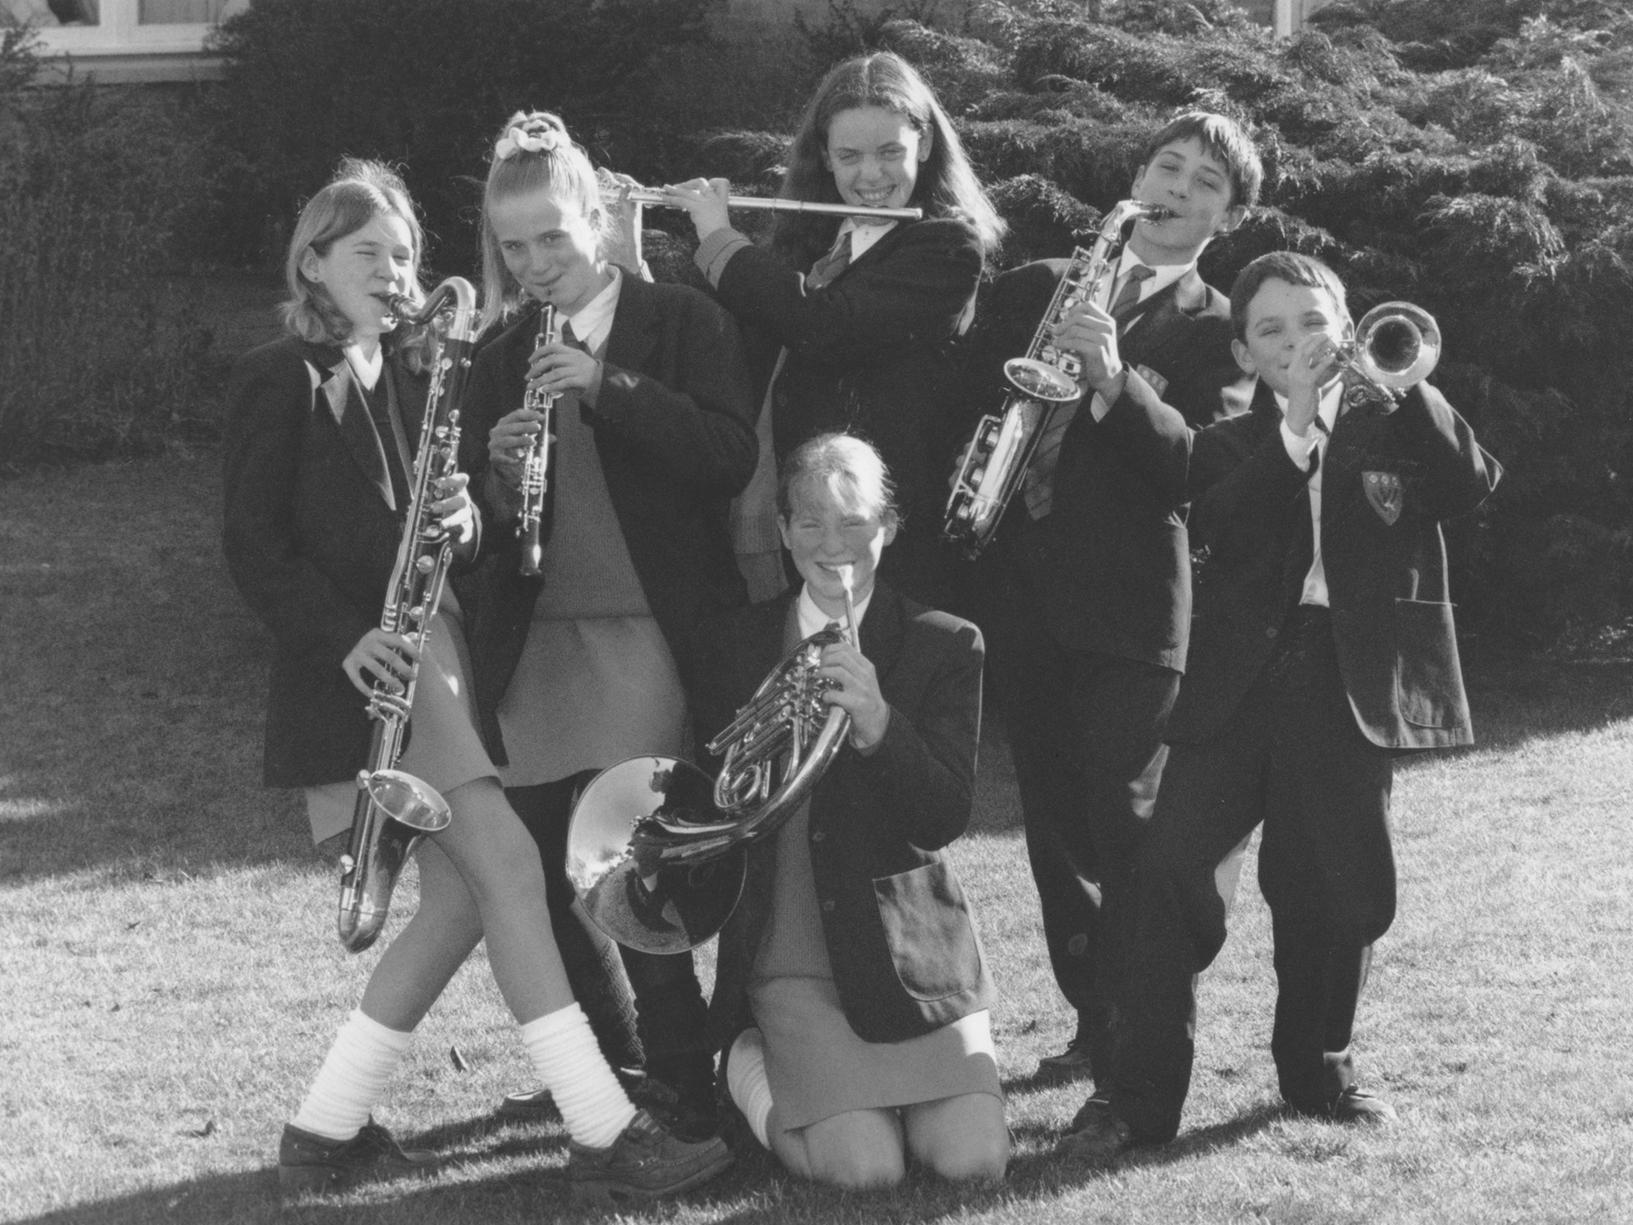 In March 1997 Scalby School pupils were having fun making music. Pictured from left, Rachel Bettley, Rachael Nicholson, Ian Robinson, Neil Tofrik, and front Joanne Vasey. Can you name the other students?